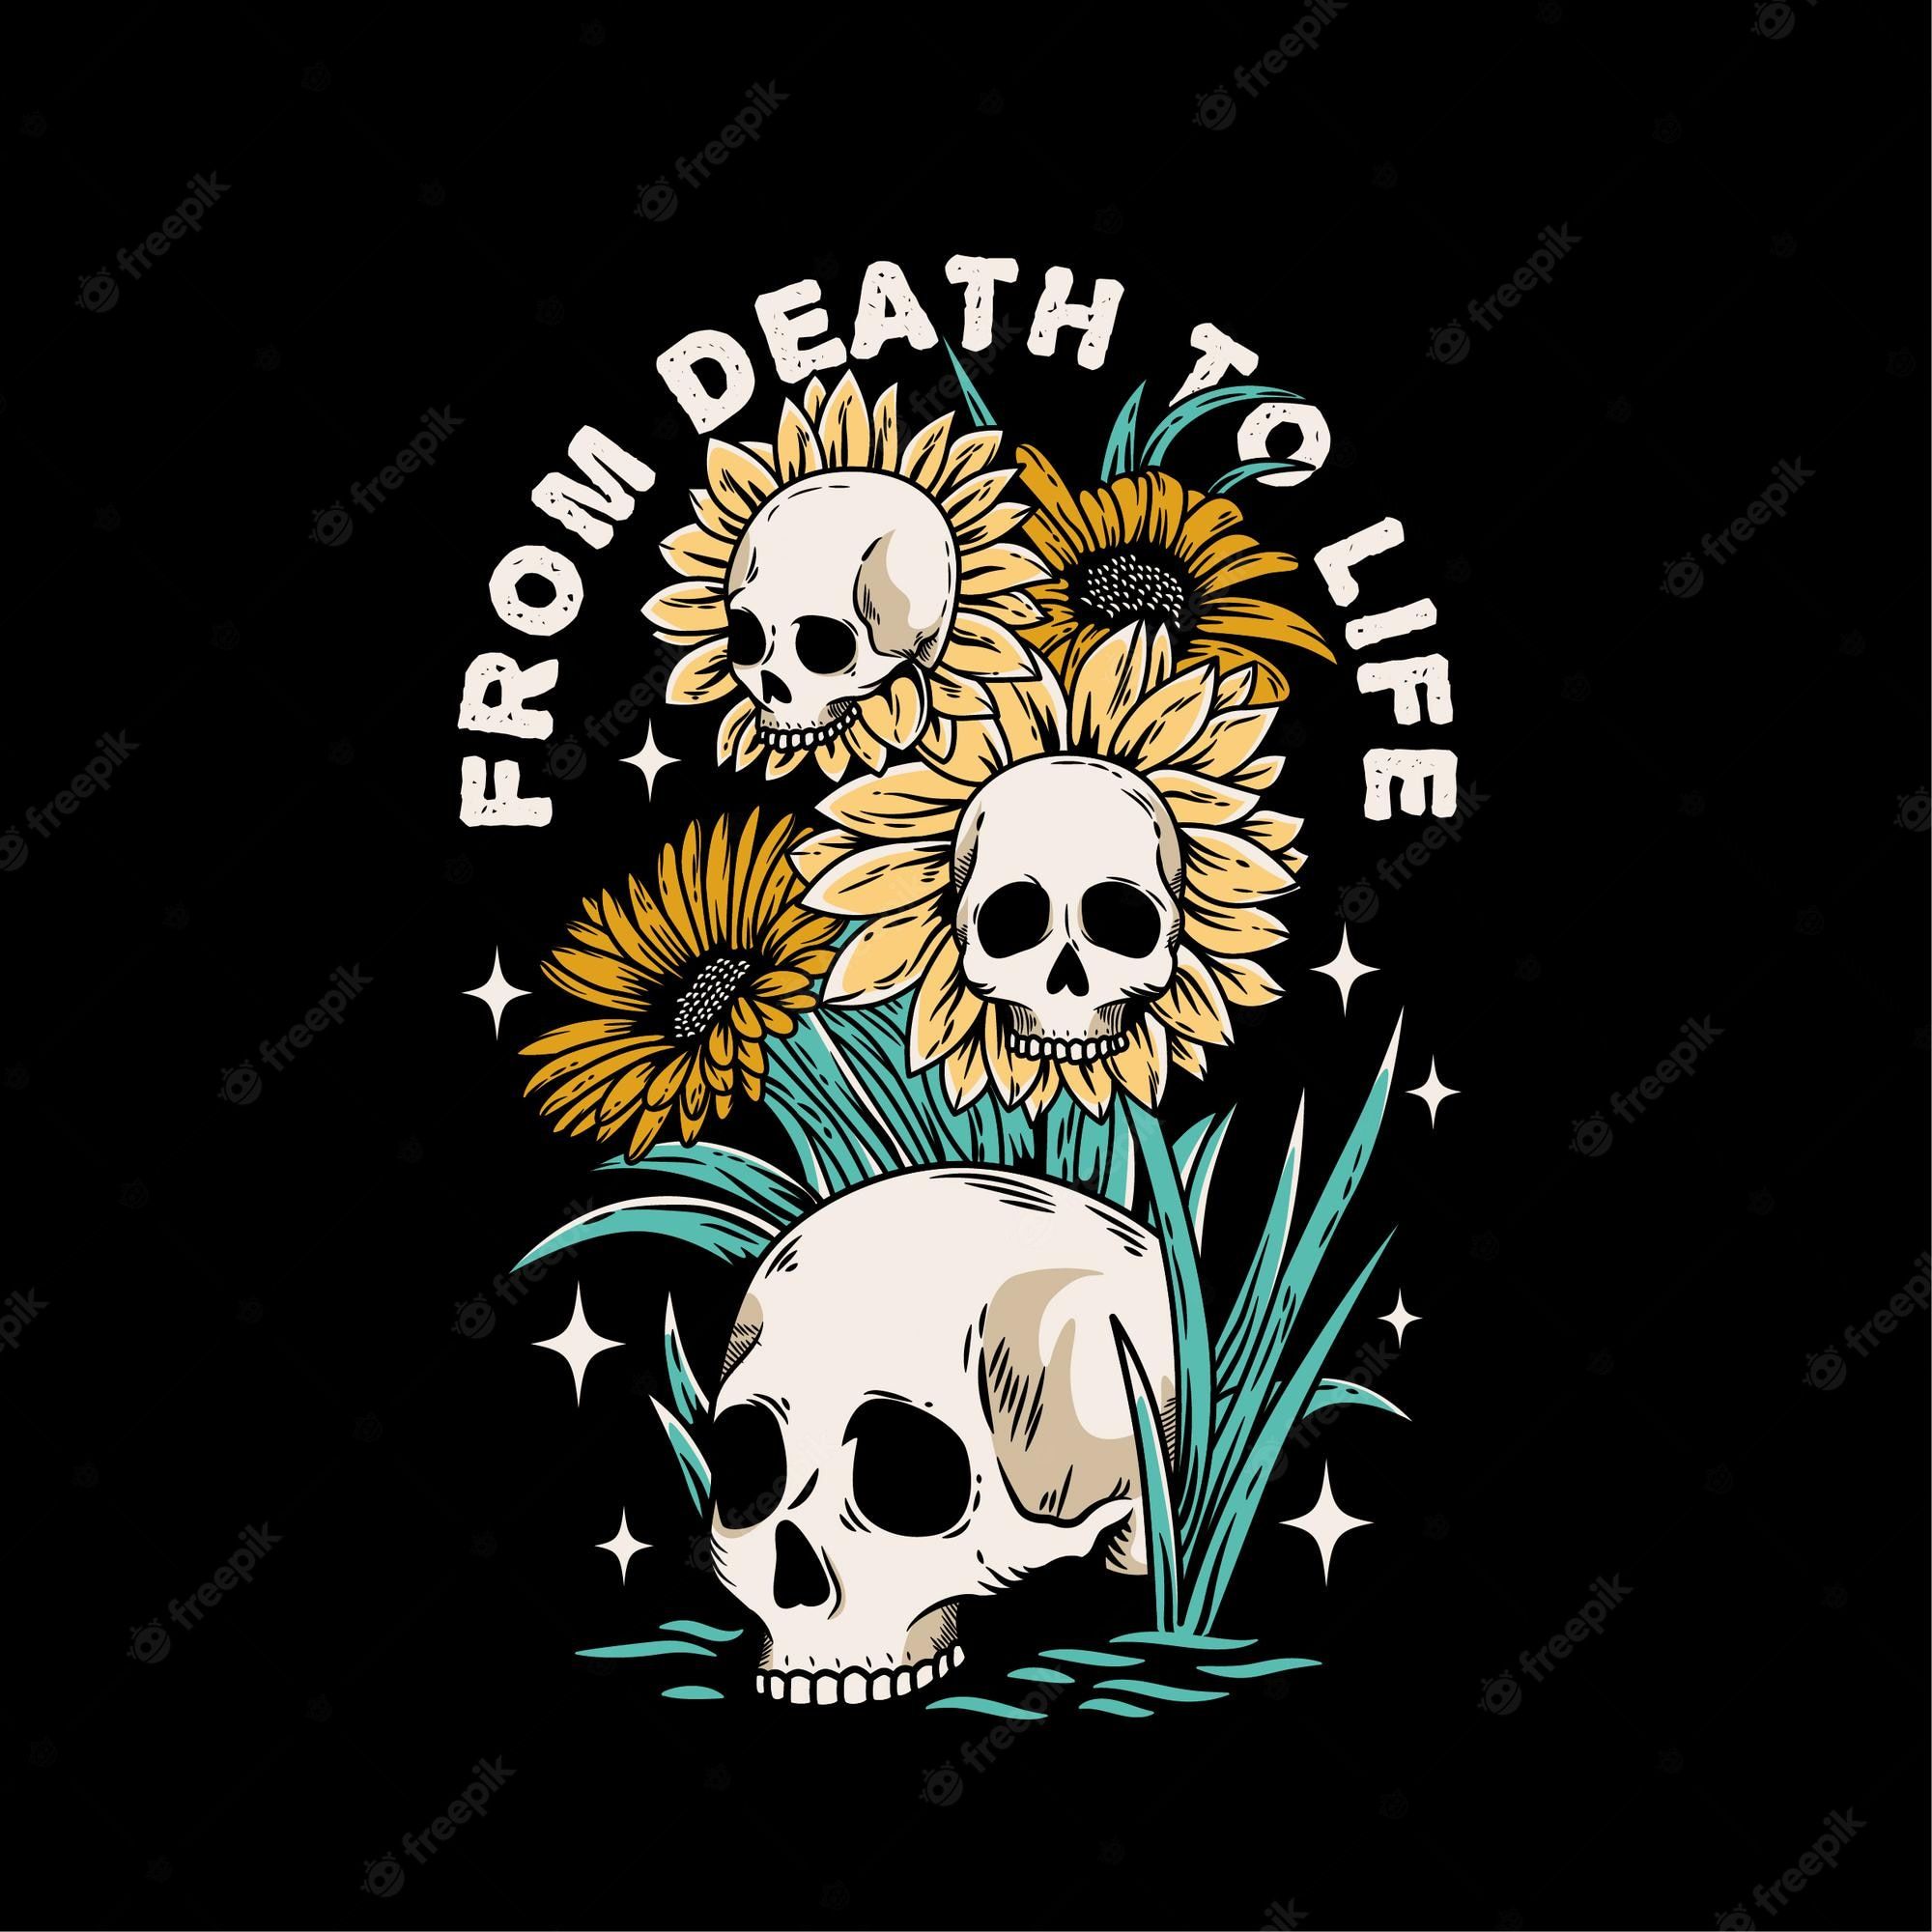 From death to life t shirt design with skulls and sunflowers - Skeleton